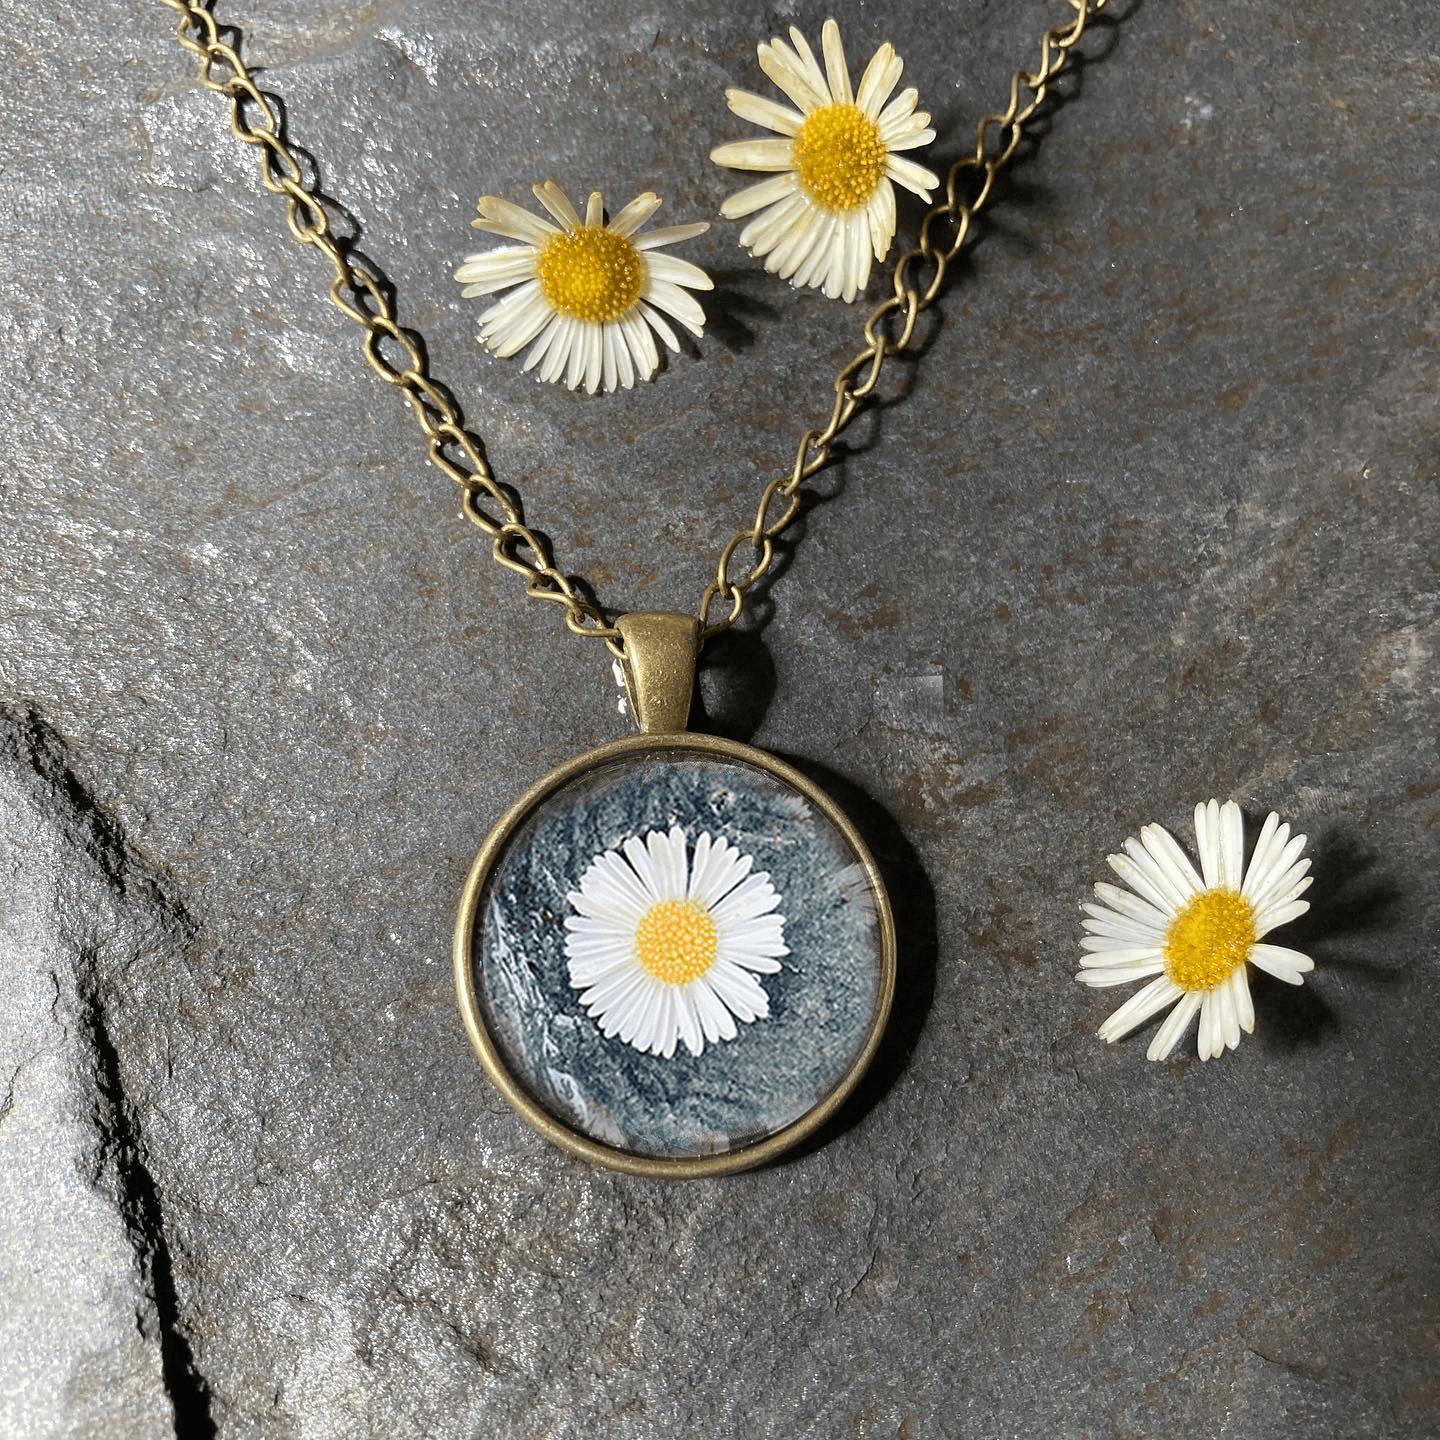 Pendant with chain - Himalayan Trails - Daisy